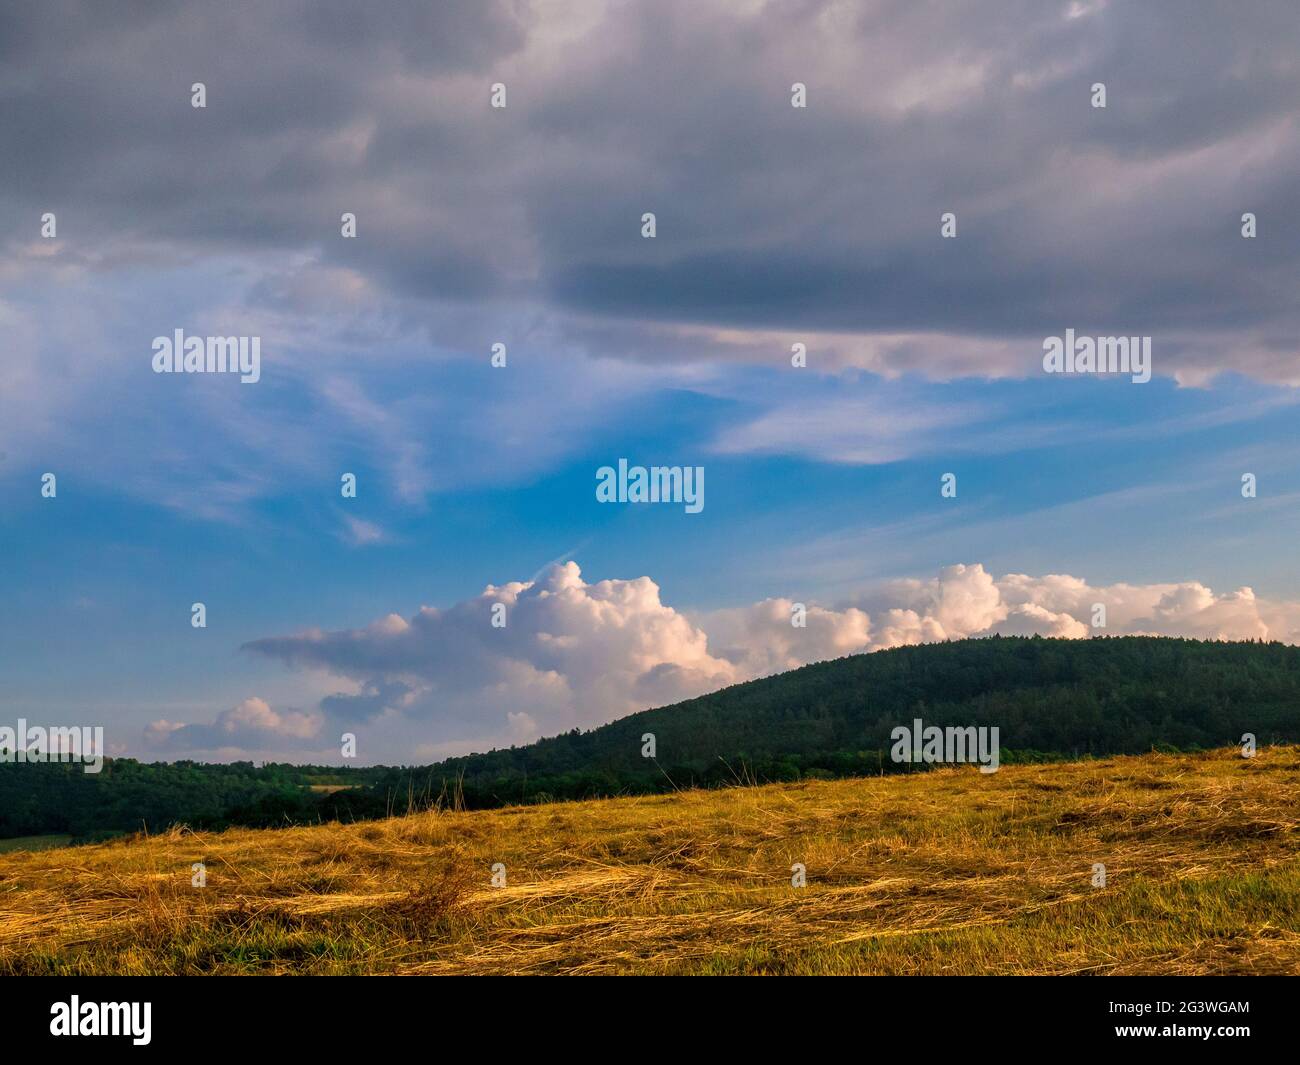 Massive clouds - towering cumulus - forming in the blue sky behind hilly landscape in the distance Stock Photo